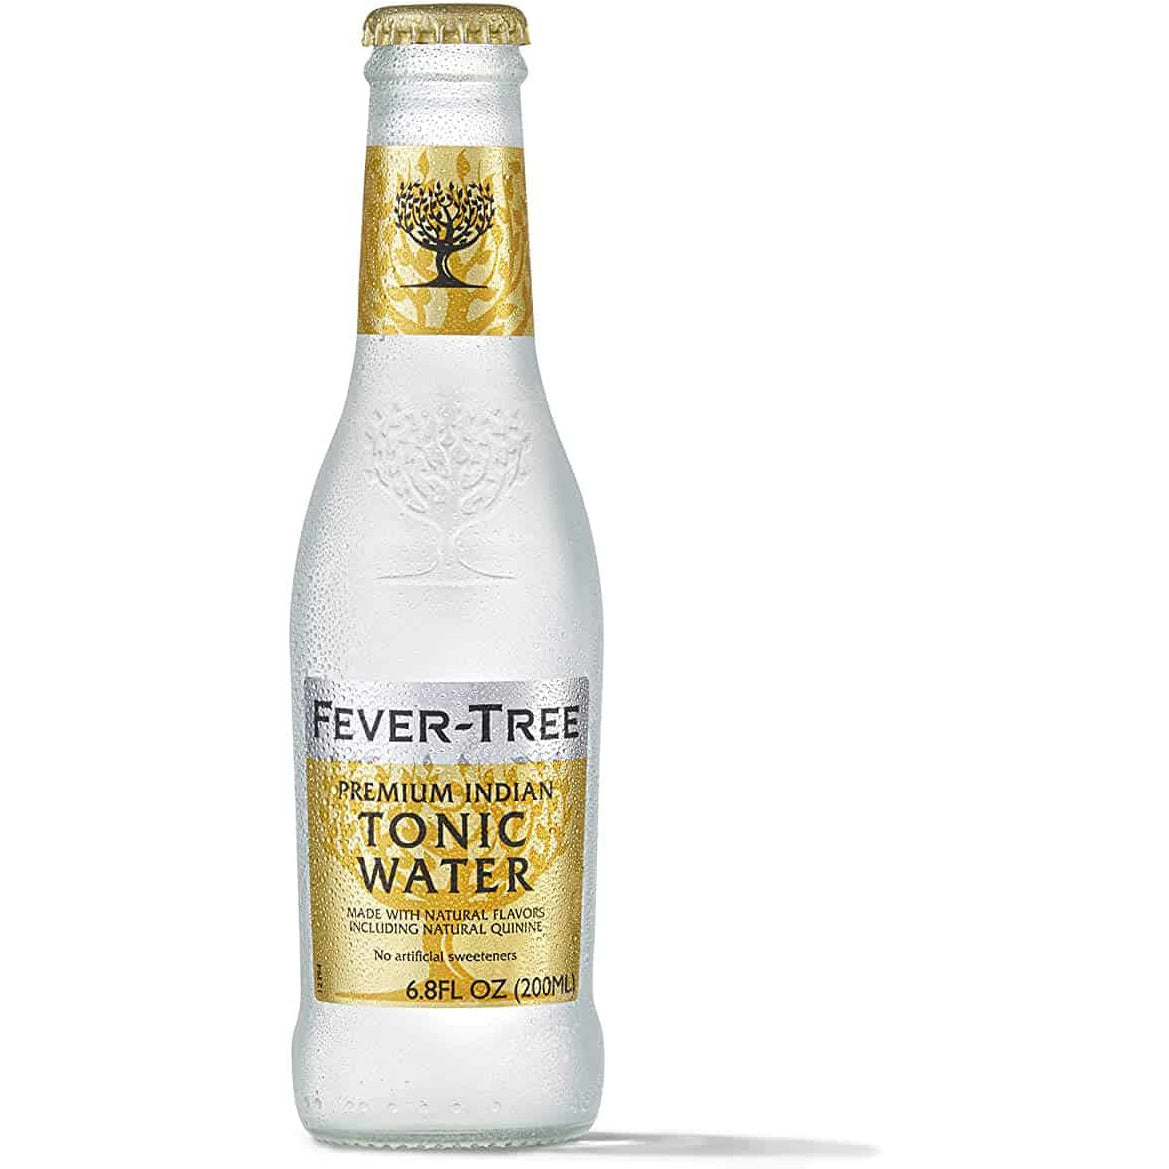 Fever-Tree Indian Tonic Water - Case of 24